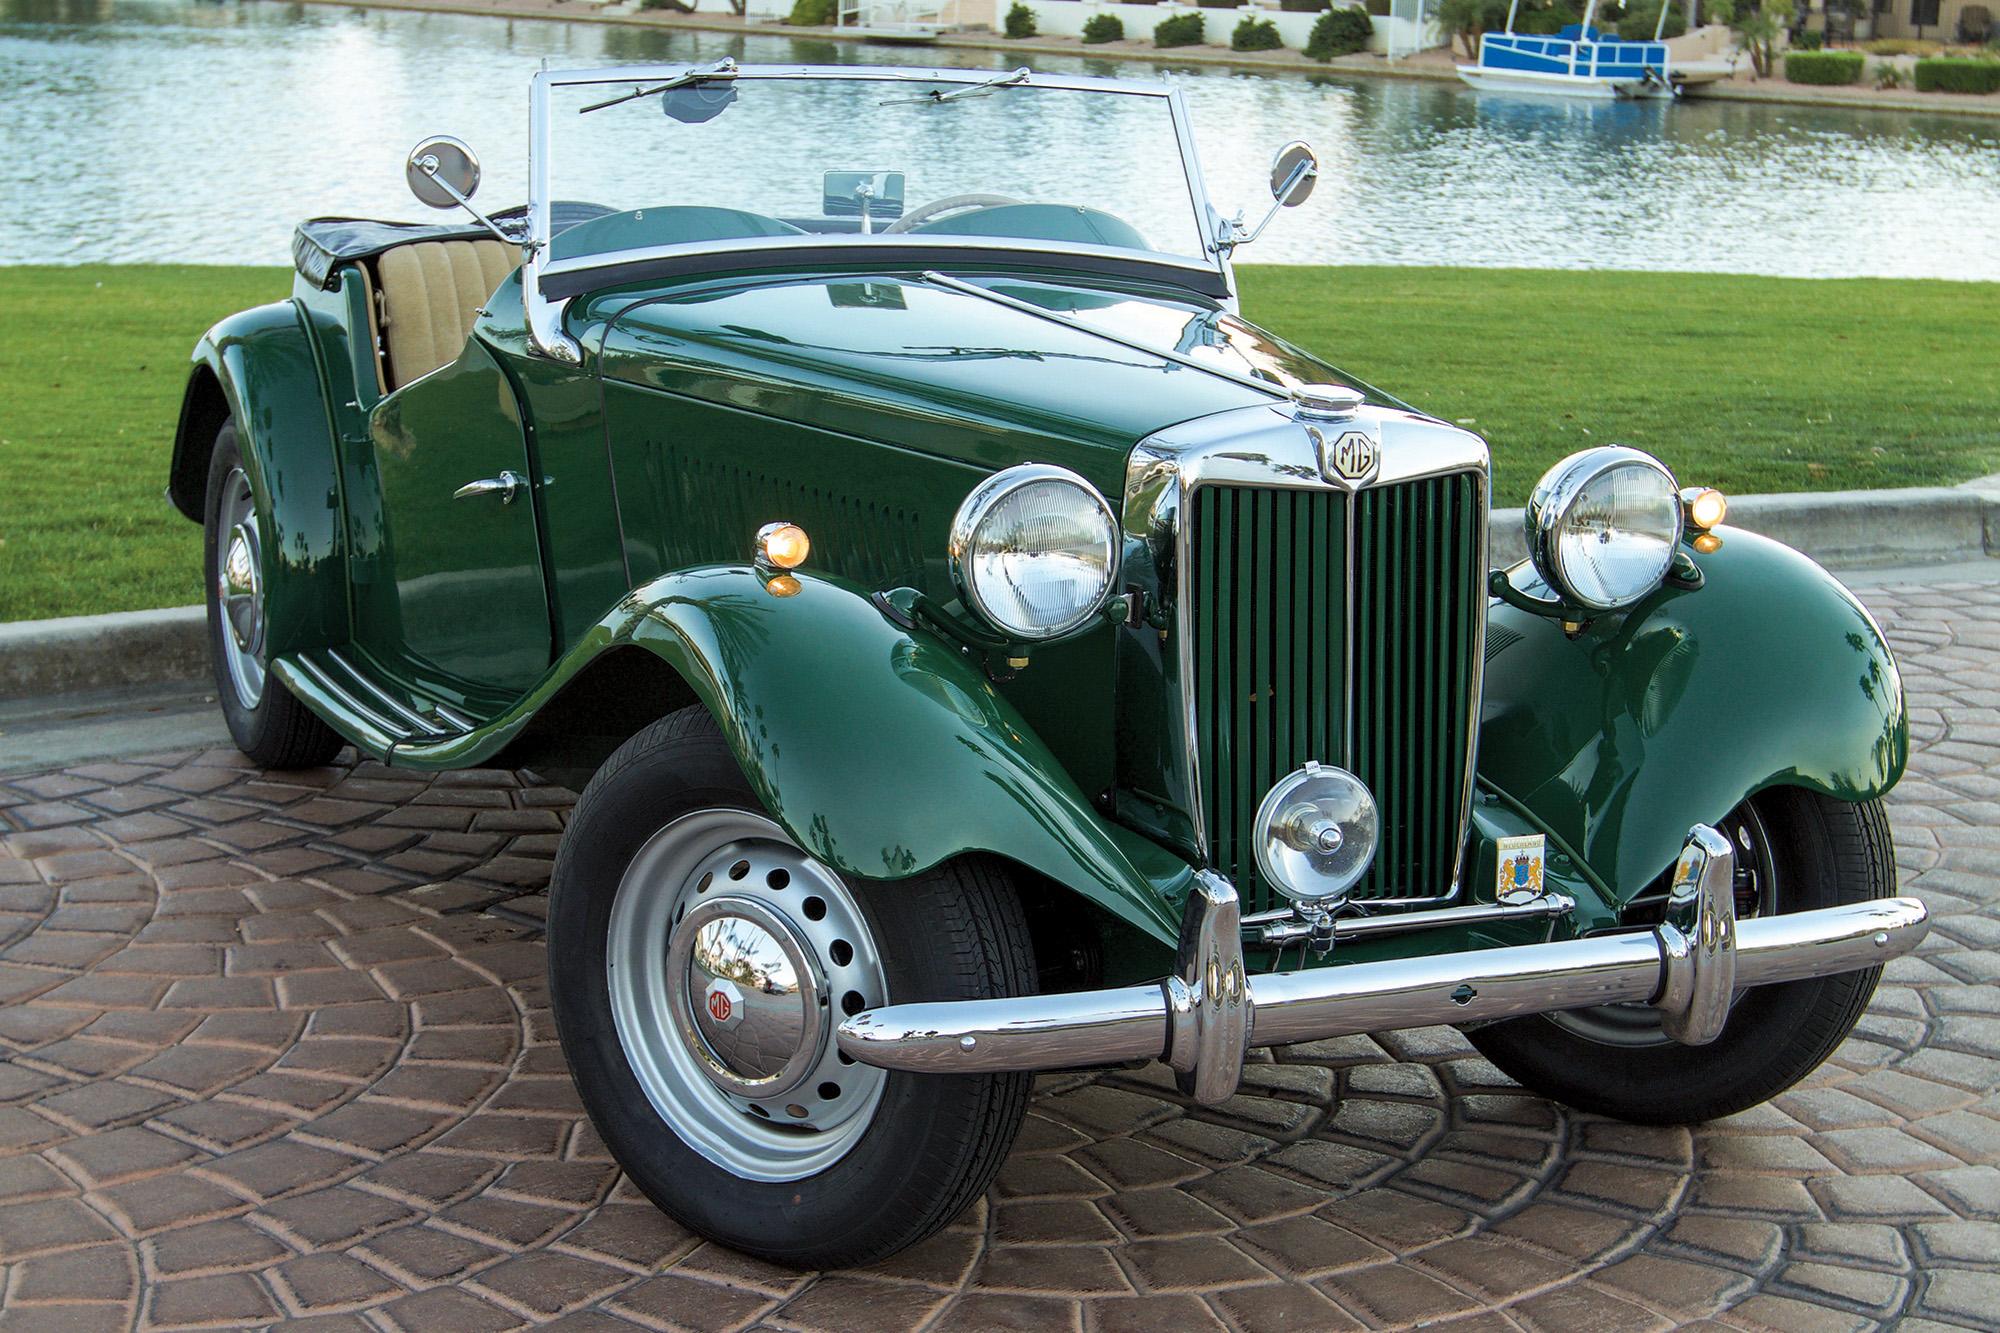 The 1951 MG TD looked good, but it took a lot of effort to undo previous owner's bodges